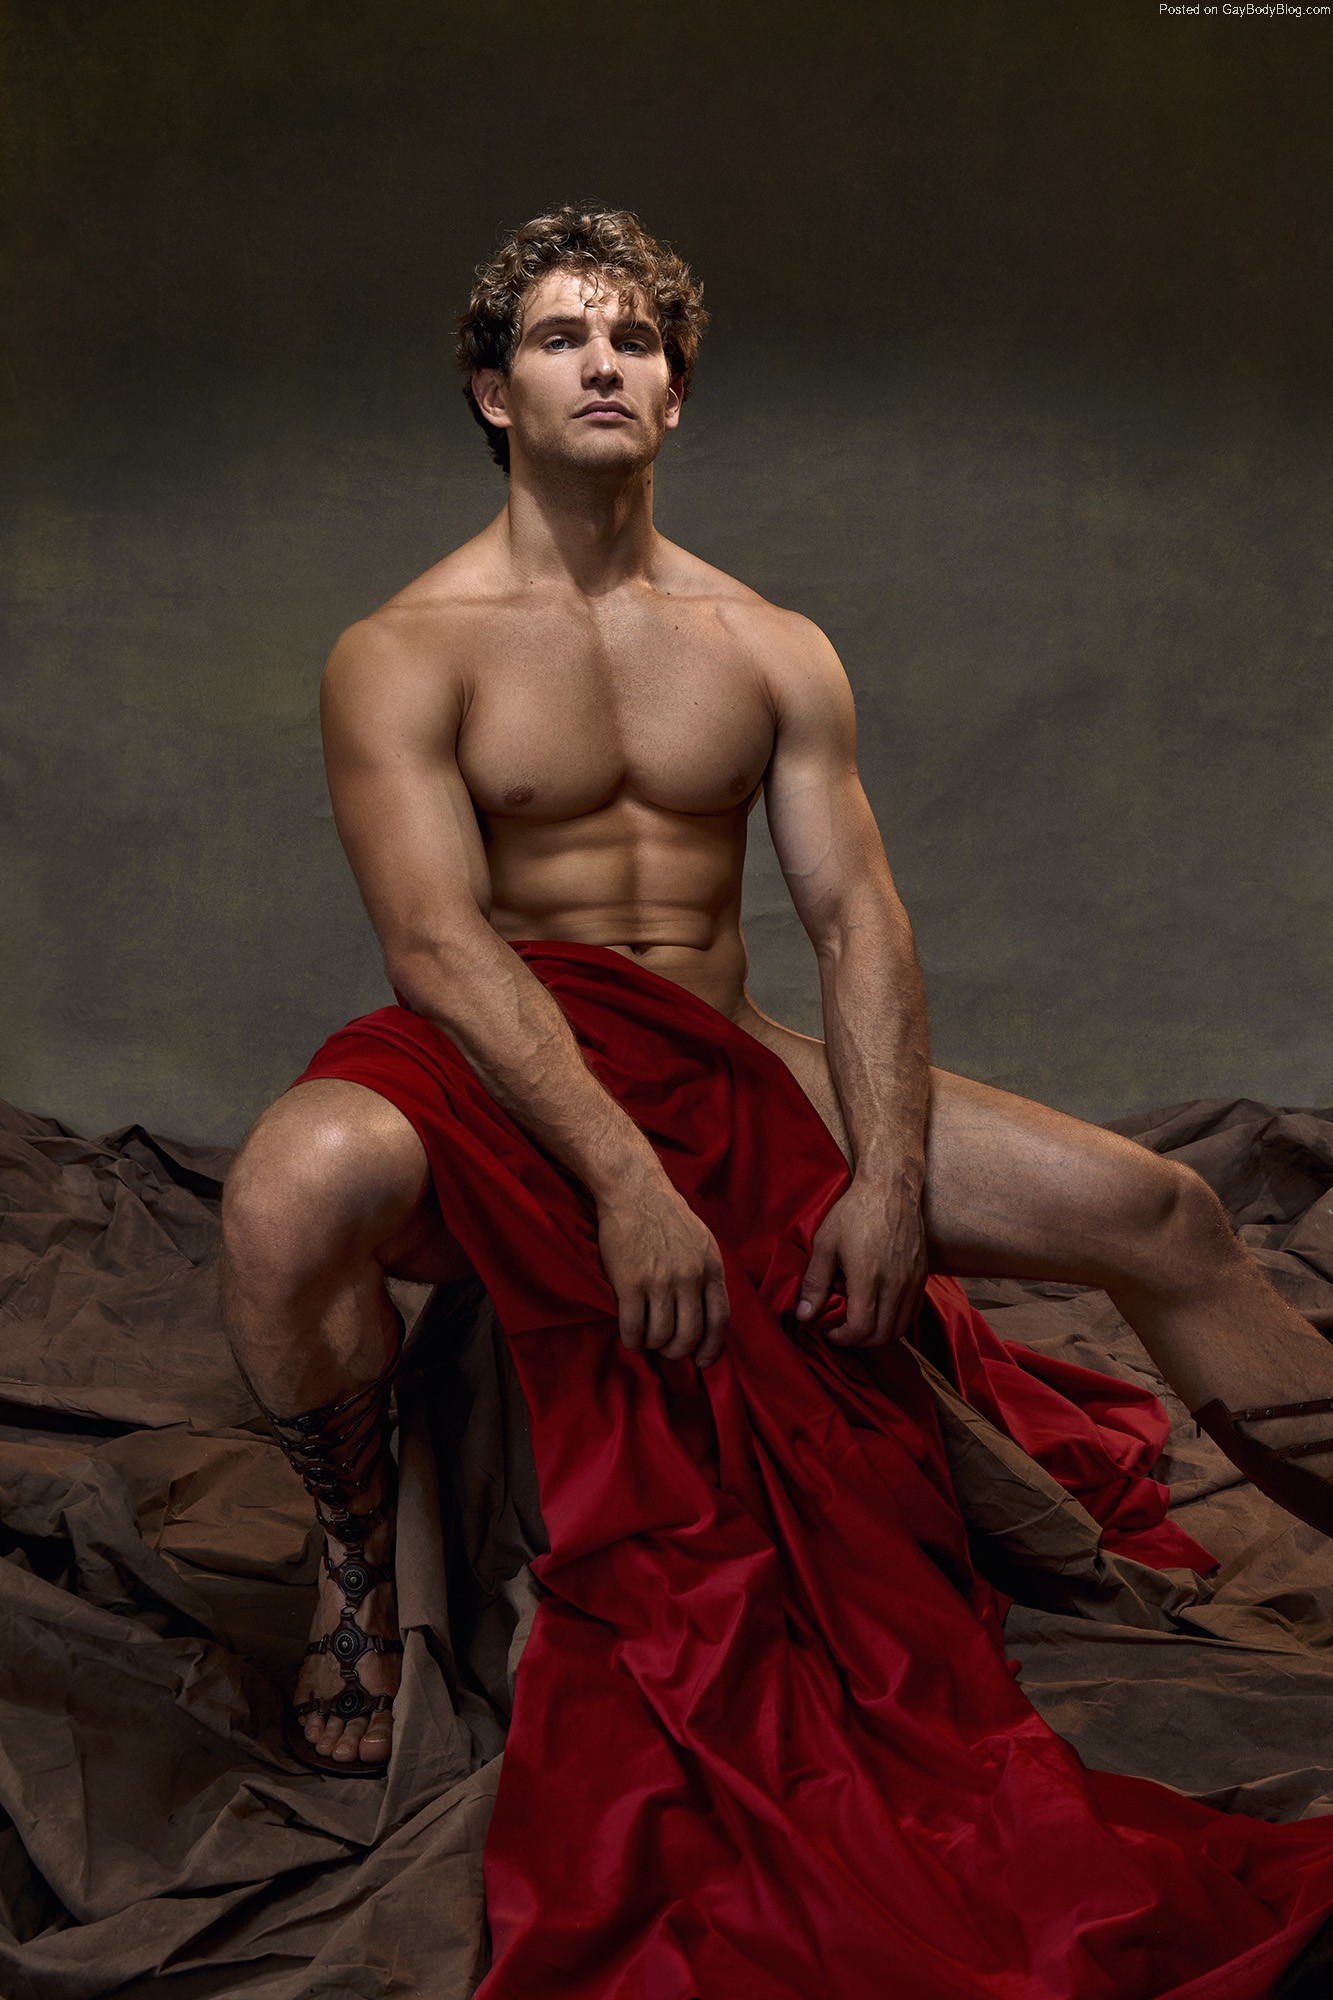 Leo Is Looking Great In This Themed Shoot | Daily Dudes @ Dude Dump